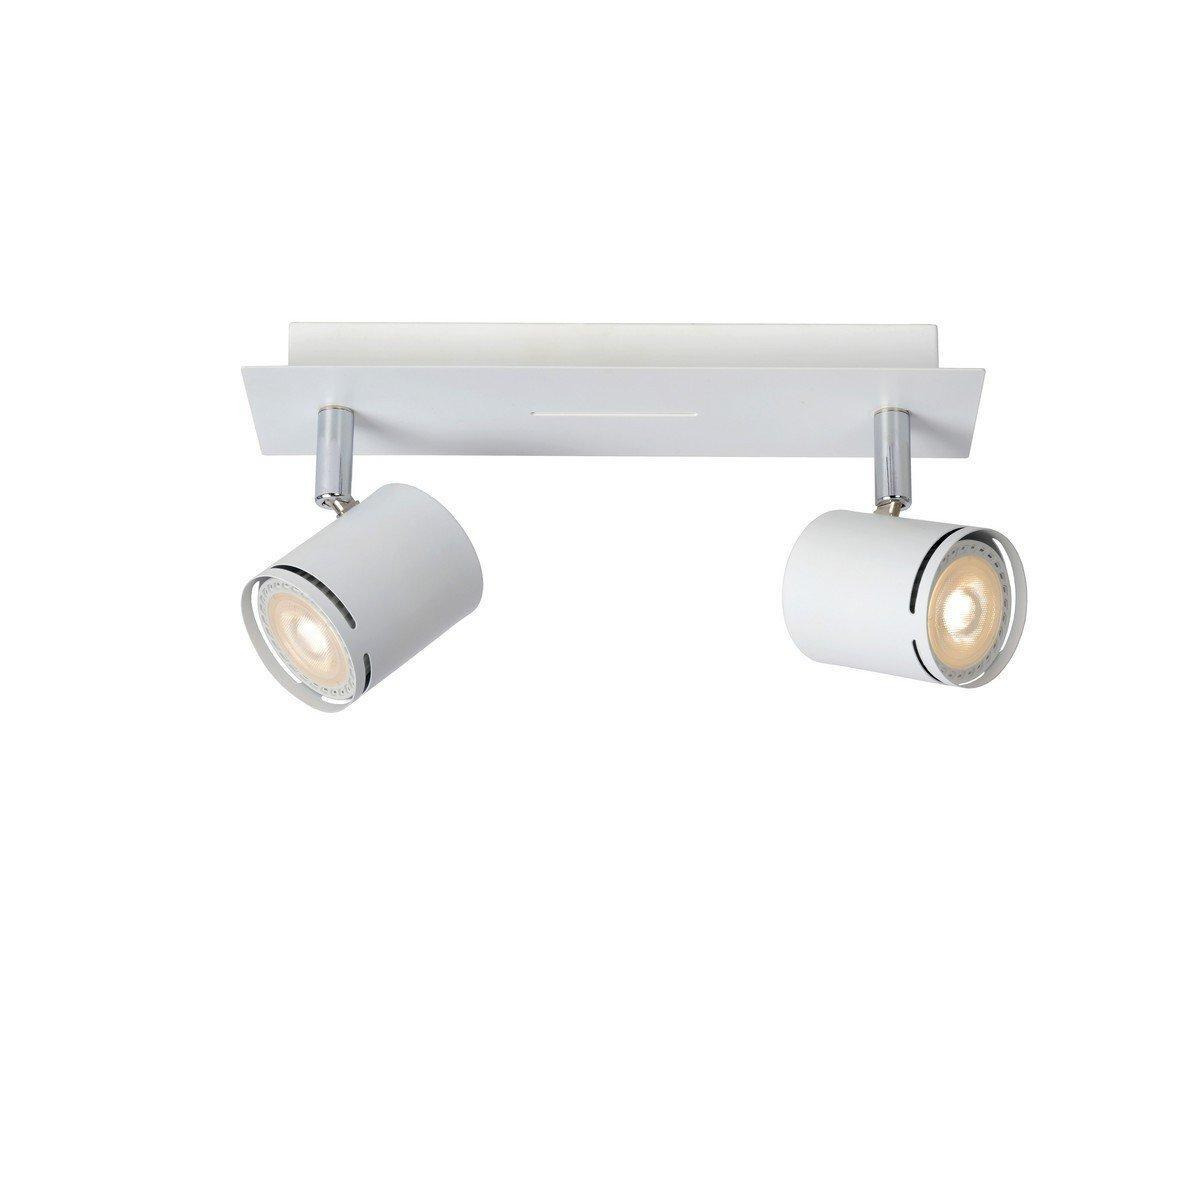 'RILOU' Dimmable Rotatable Indoor LED Twin Ceiling Spotlight GU10 - image 1